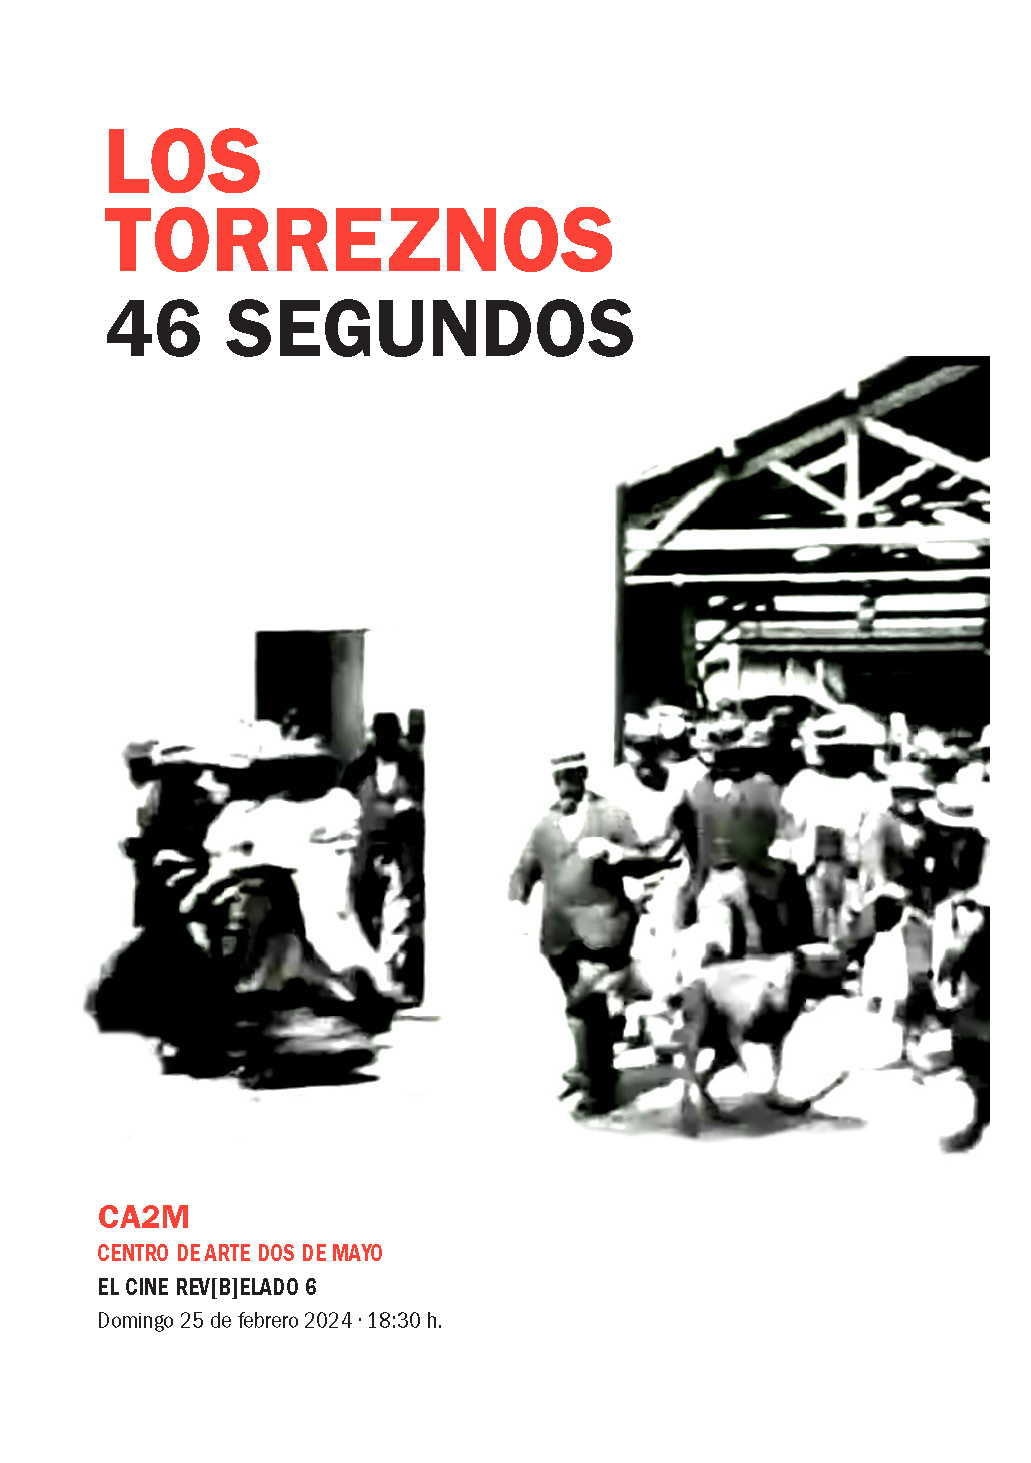 FORTY SIX SECONDS BY LOS TORREZNOS AT THE CA2M